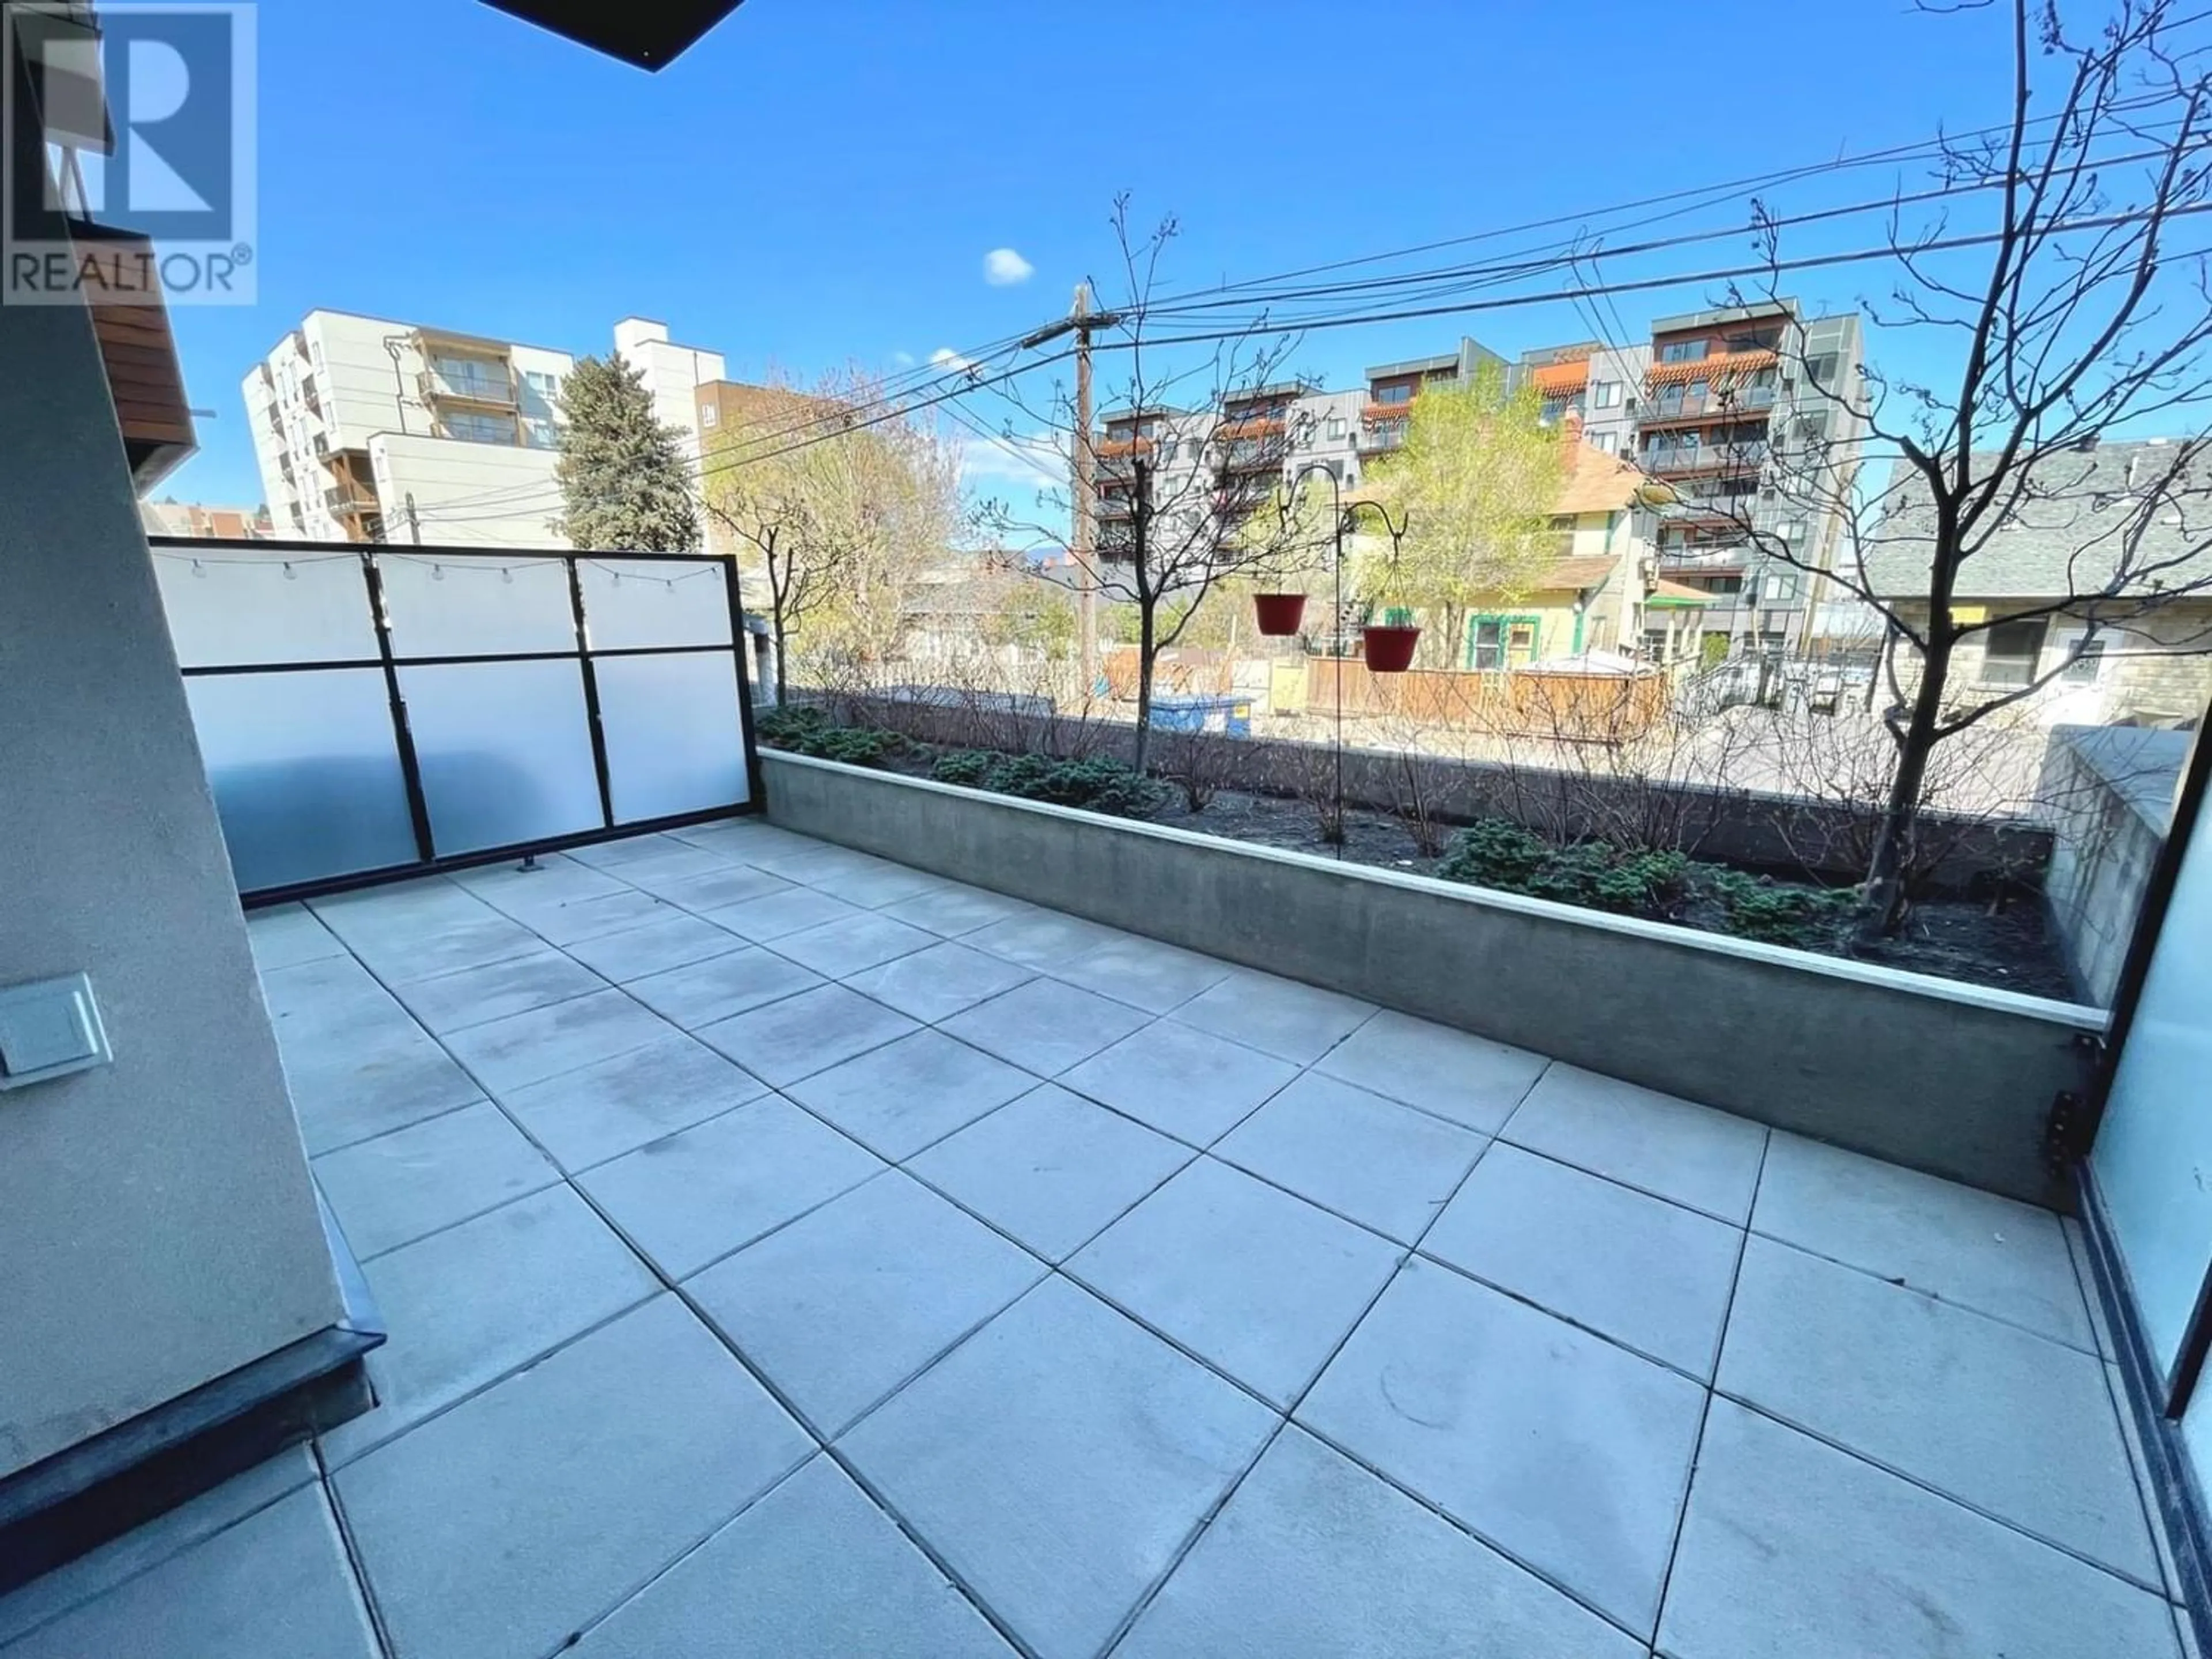 Balcony in the apartment for 110-460 5TH AVE, Kamloops British Columbia V2C5Y2